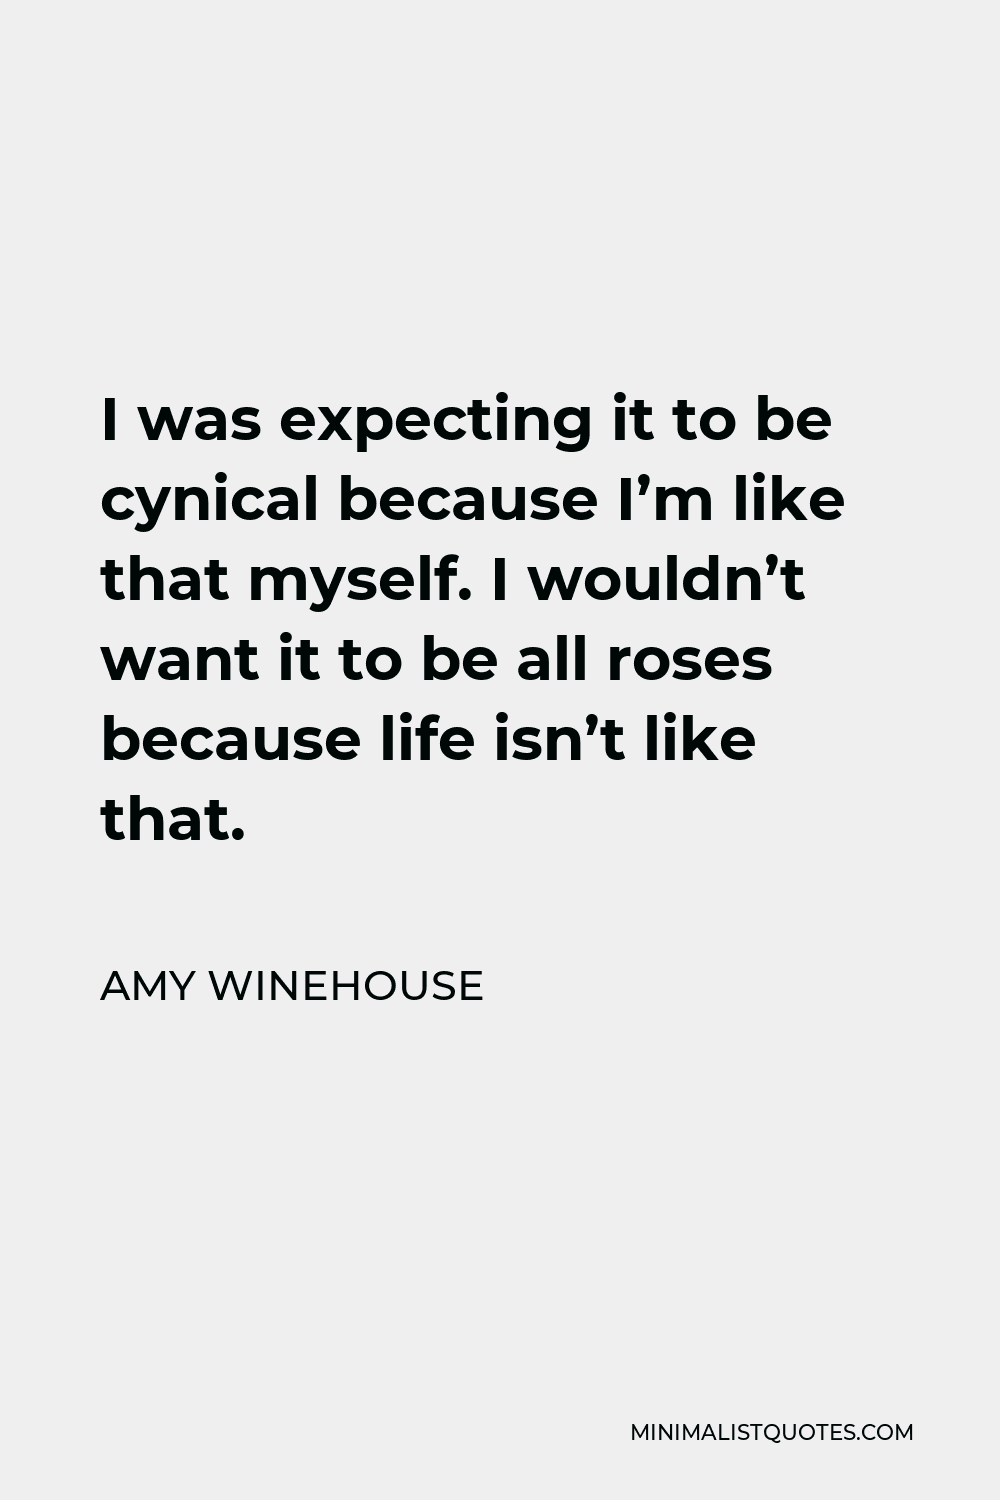 Amy Winehouse Quote - I was expecting it to be cynical because I’m like that myself. I wouldn’t want it to be all roses because life isn’t like that.